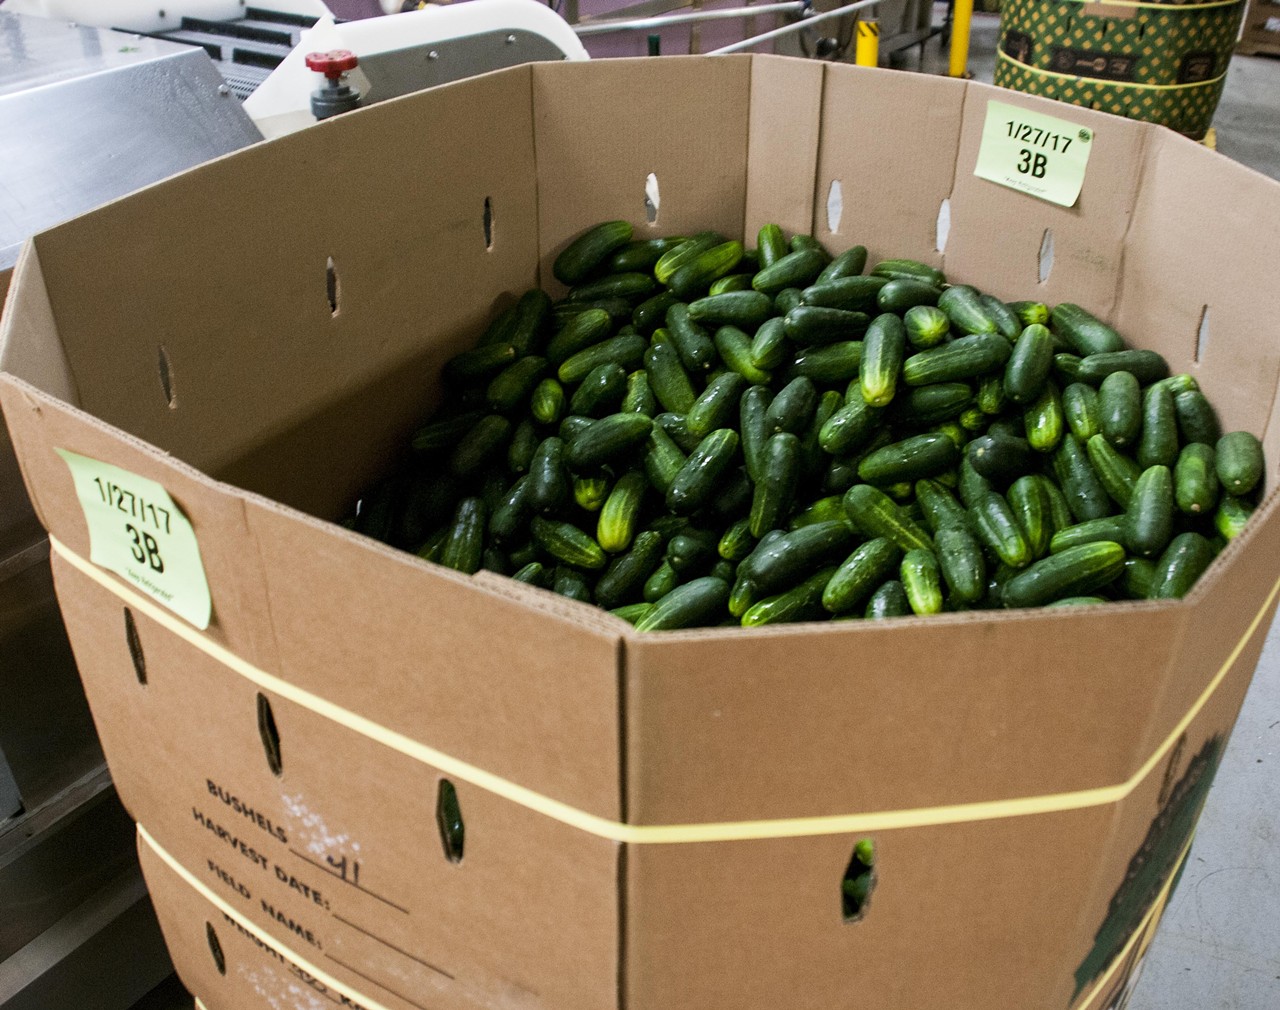 McClure's orders cucumbers by the truckload direct from farmers who grow crops specifically for the company. Each week, Joe McClure buys 12 boxes, or "totes," that each hold 2,000 pounds of cucumbers. Yes, that's a whole lot of cucumbers.